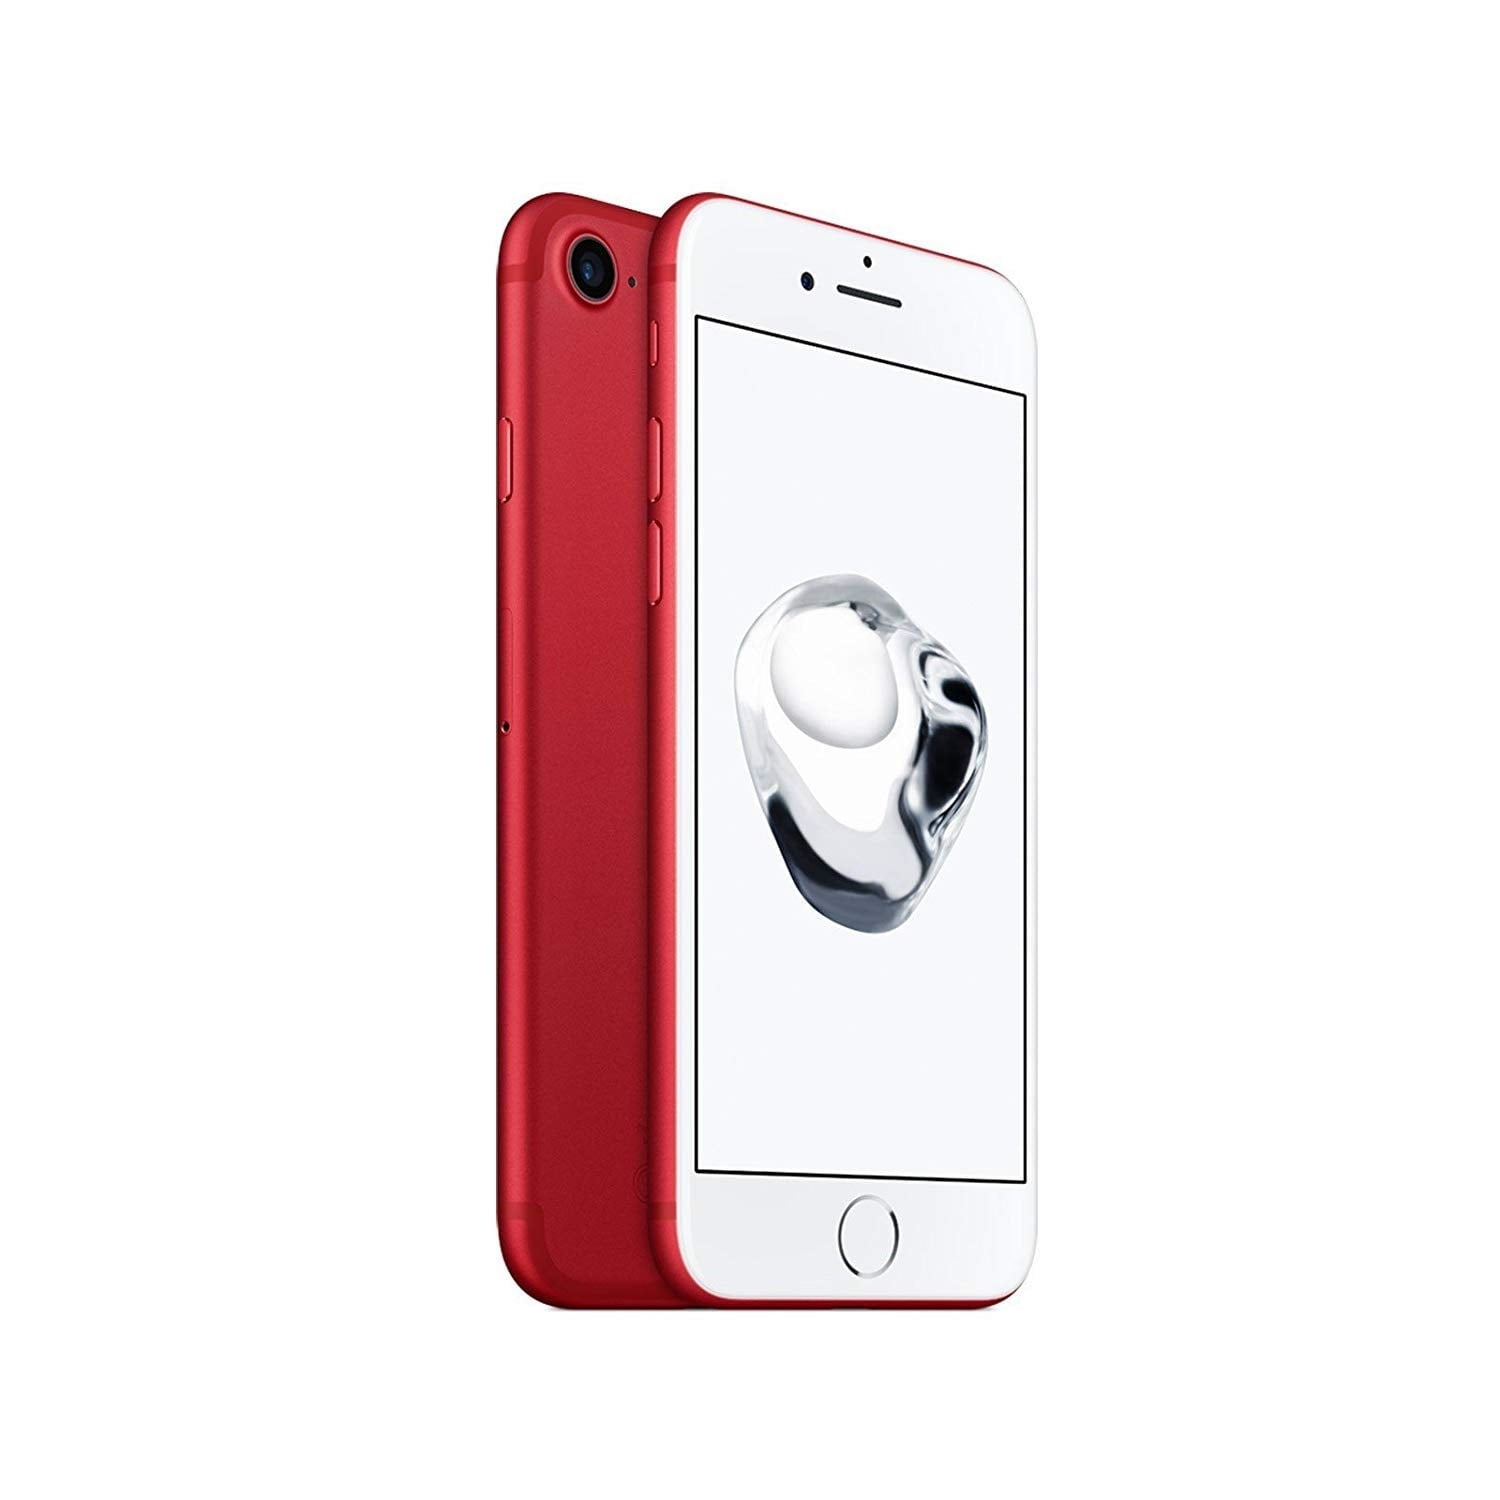 Apple iPhone 7 128GB iOS GSM Unlocked, Red (Scratch And Dent Used ...